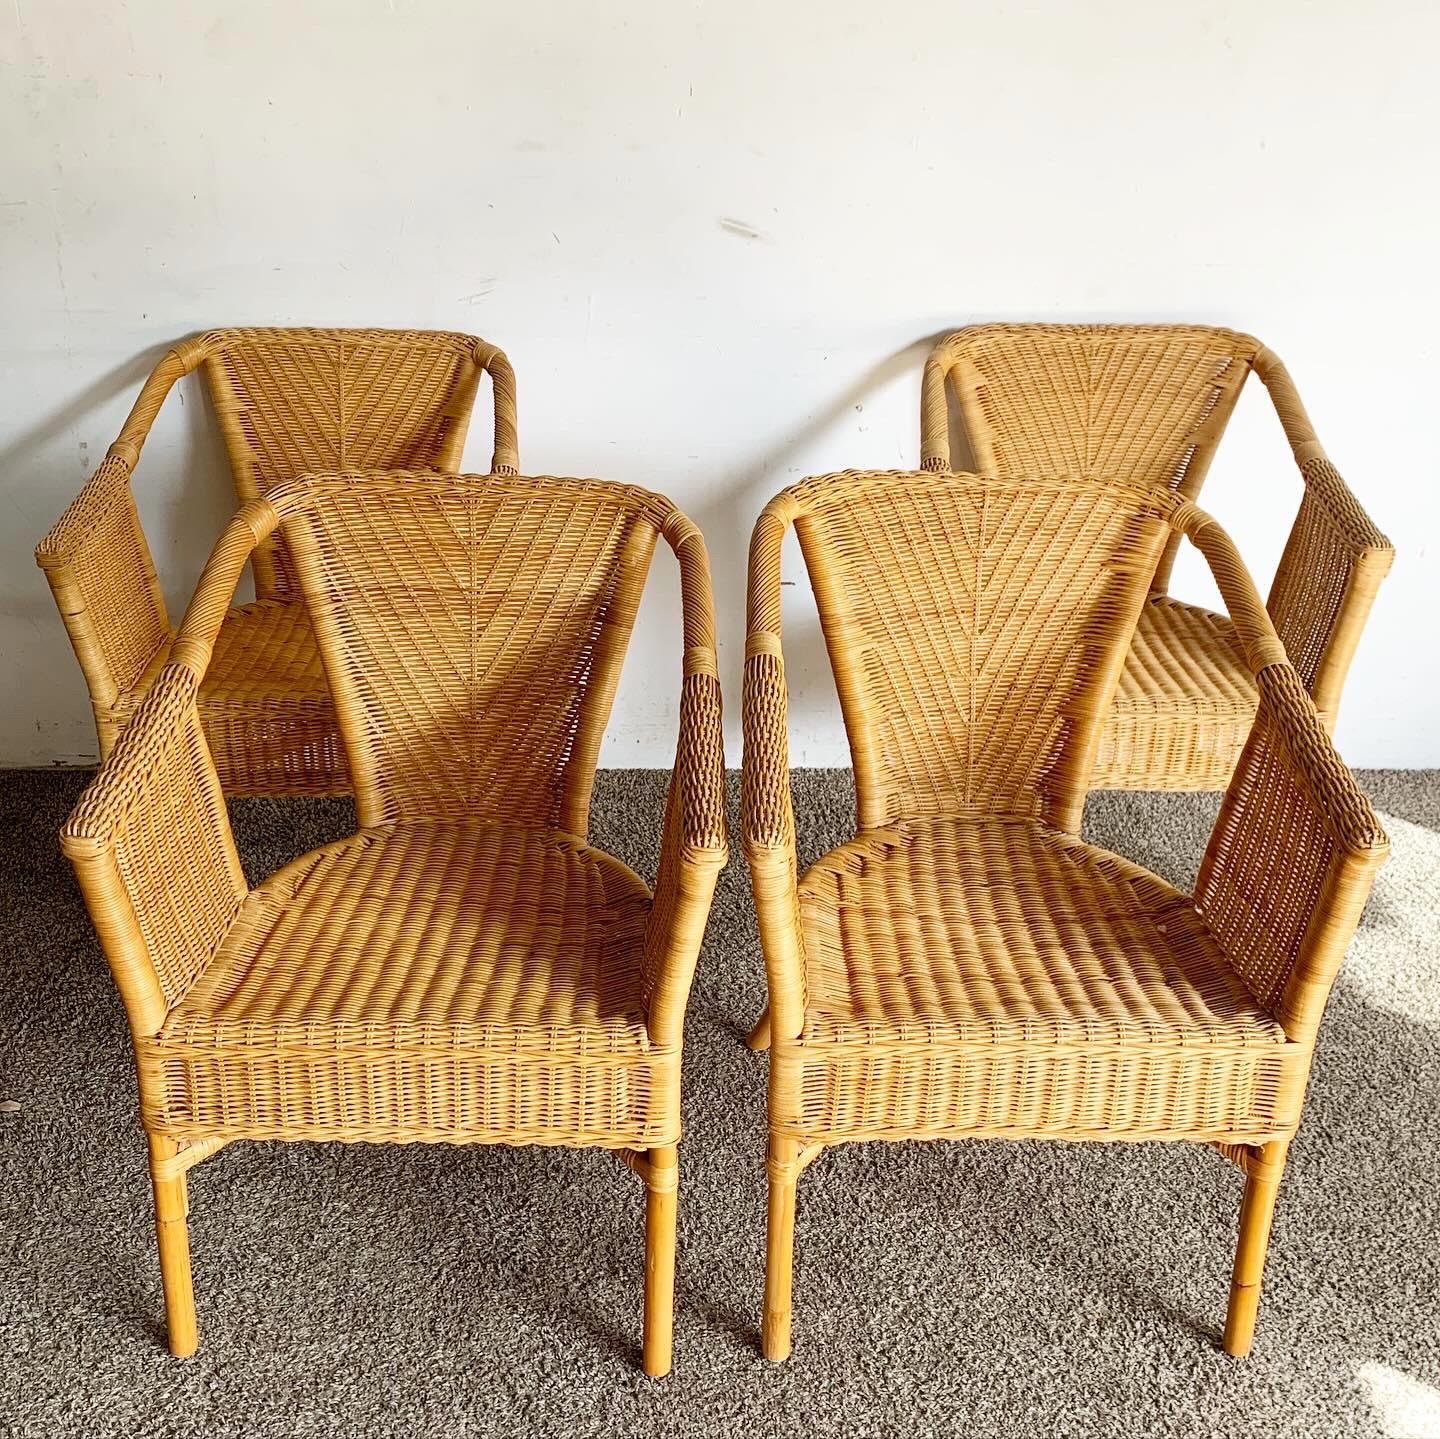 Boho Chic Wicker and Rattan Dining Arm Chairs - Set of 4 For Sale 3